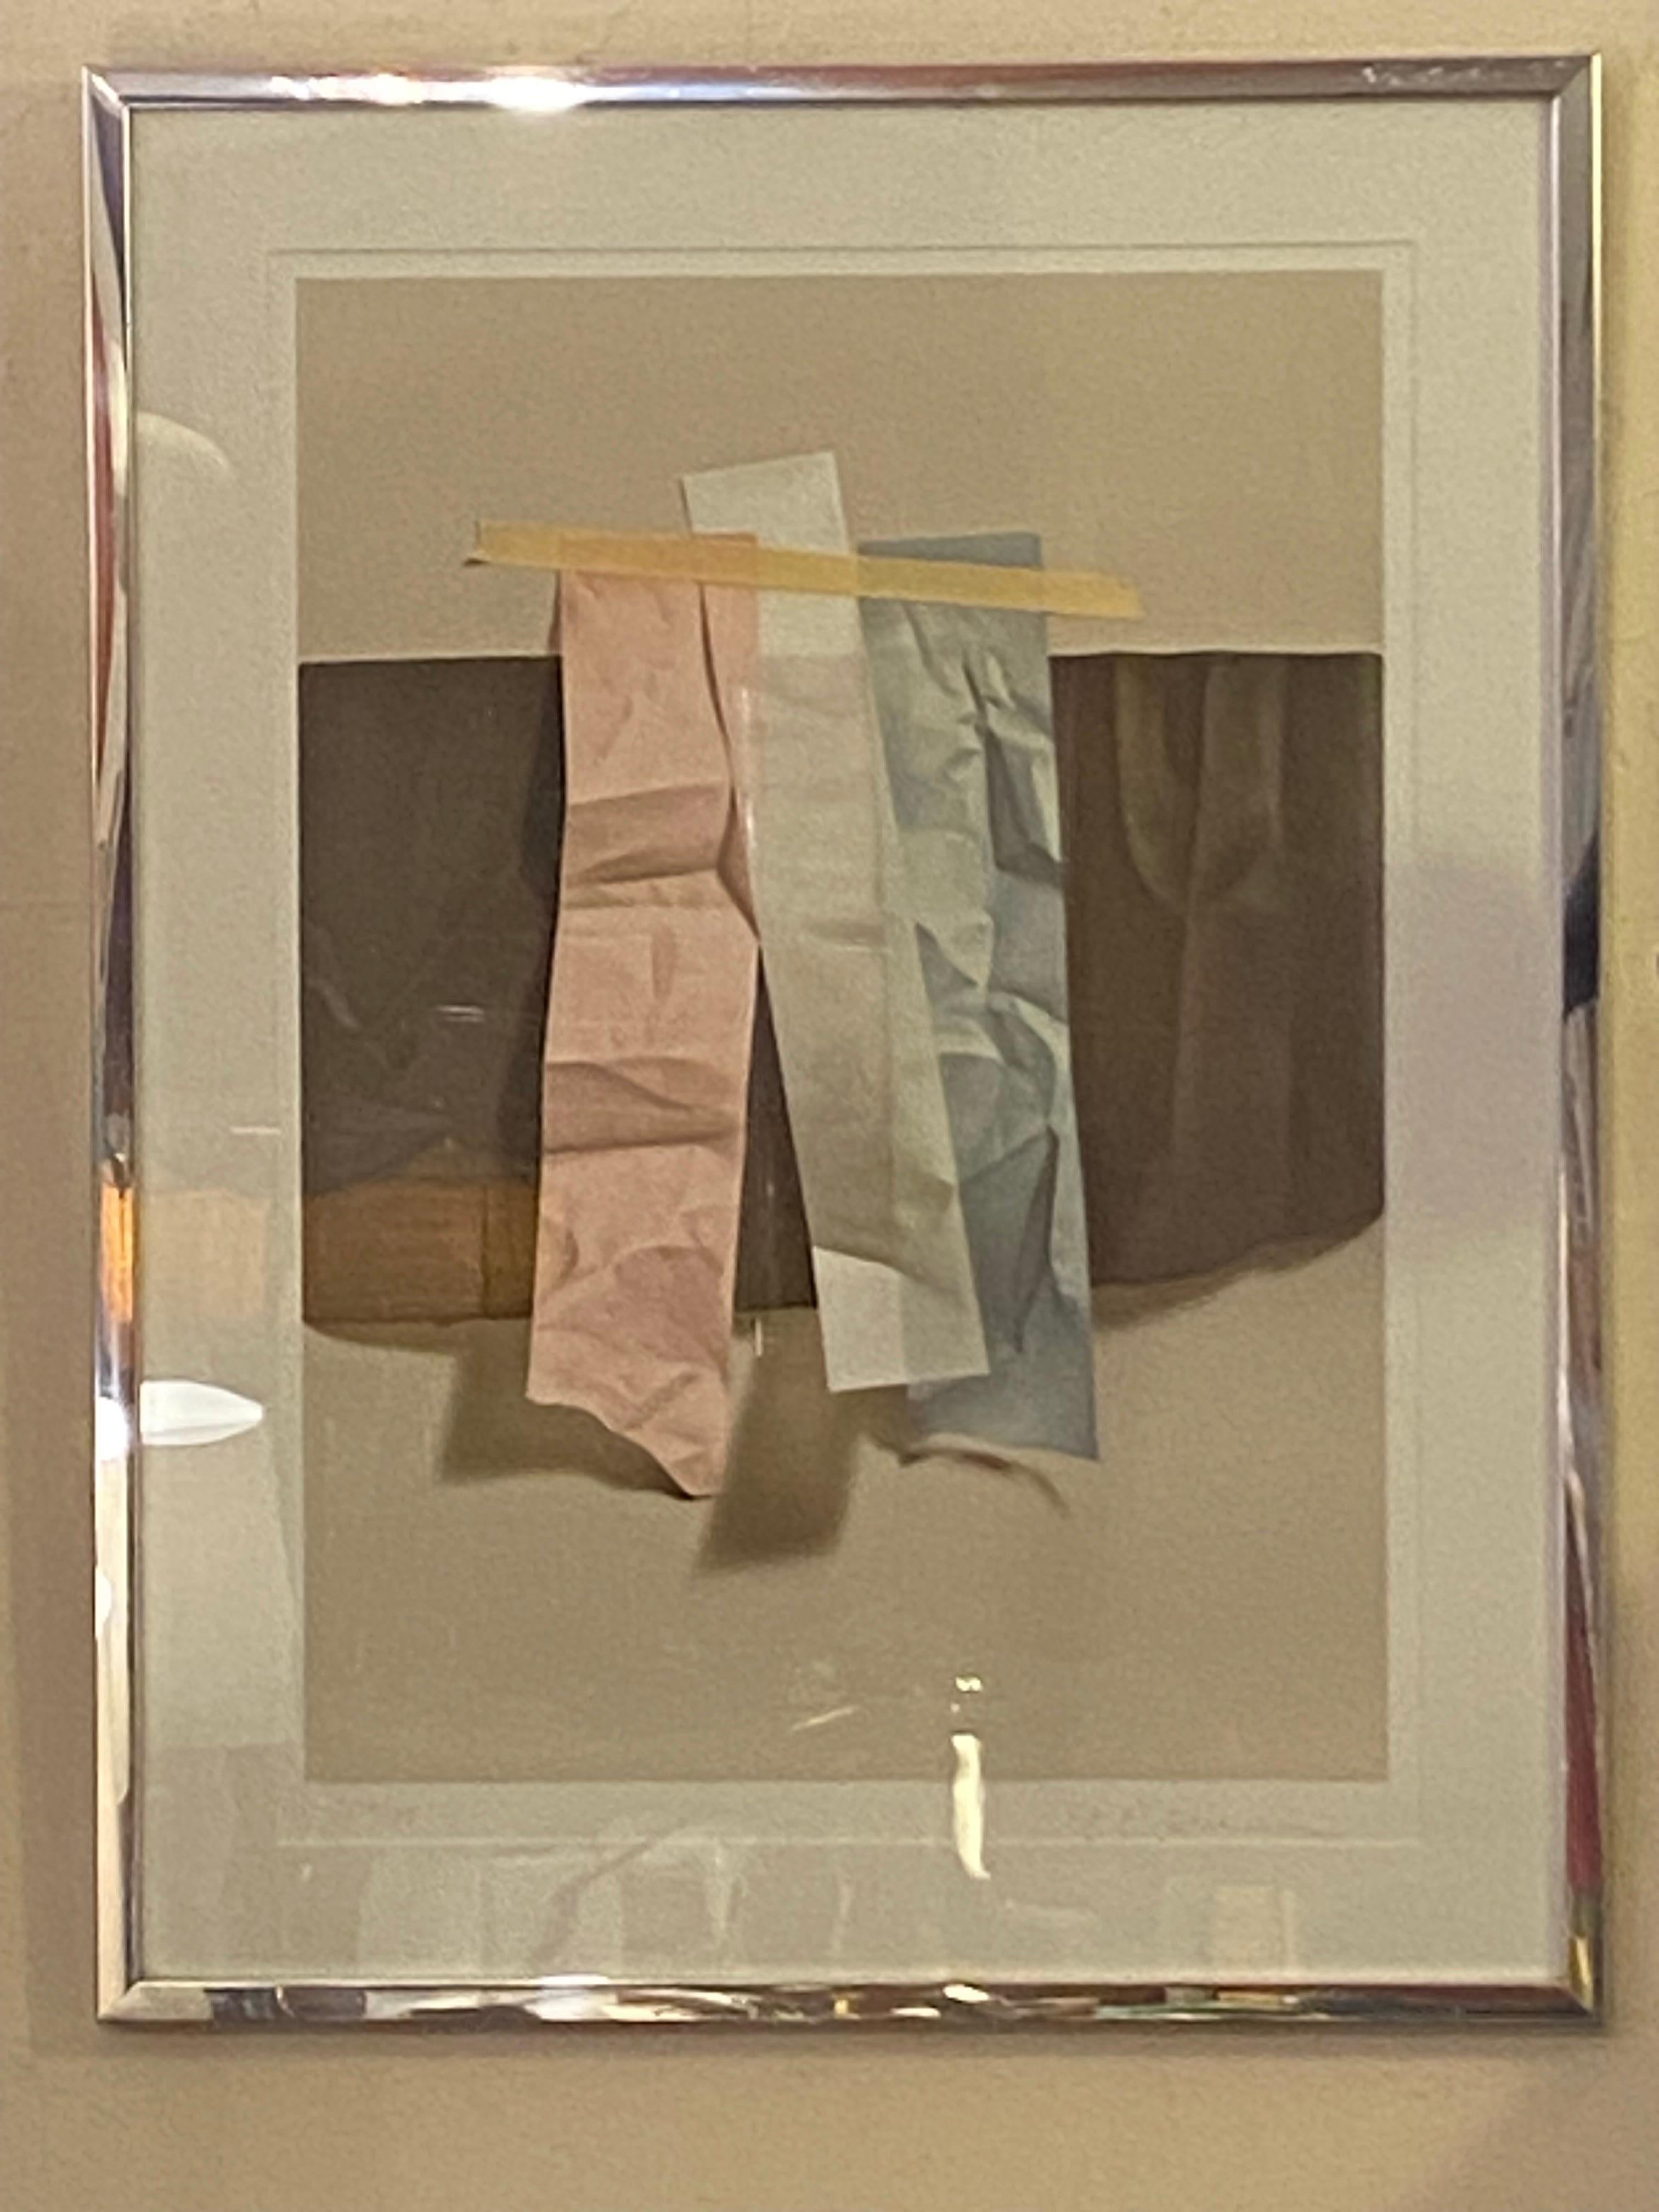 Yrjo Edelmann Signed and numbered Litho from the Mid 1980's.  Known for his hyperrealistic art subjects of wrapped and folded paper pieces.  Framed in what appears to be it's original frame!